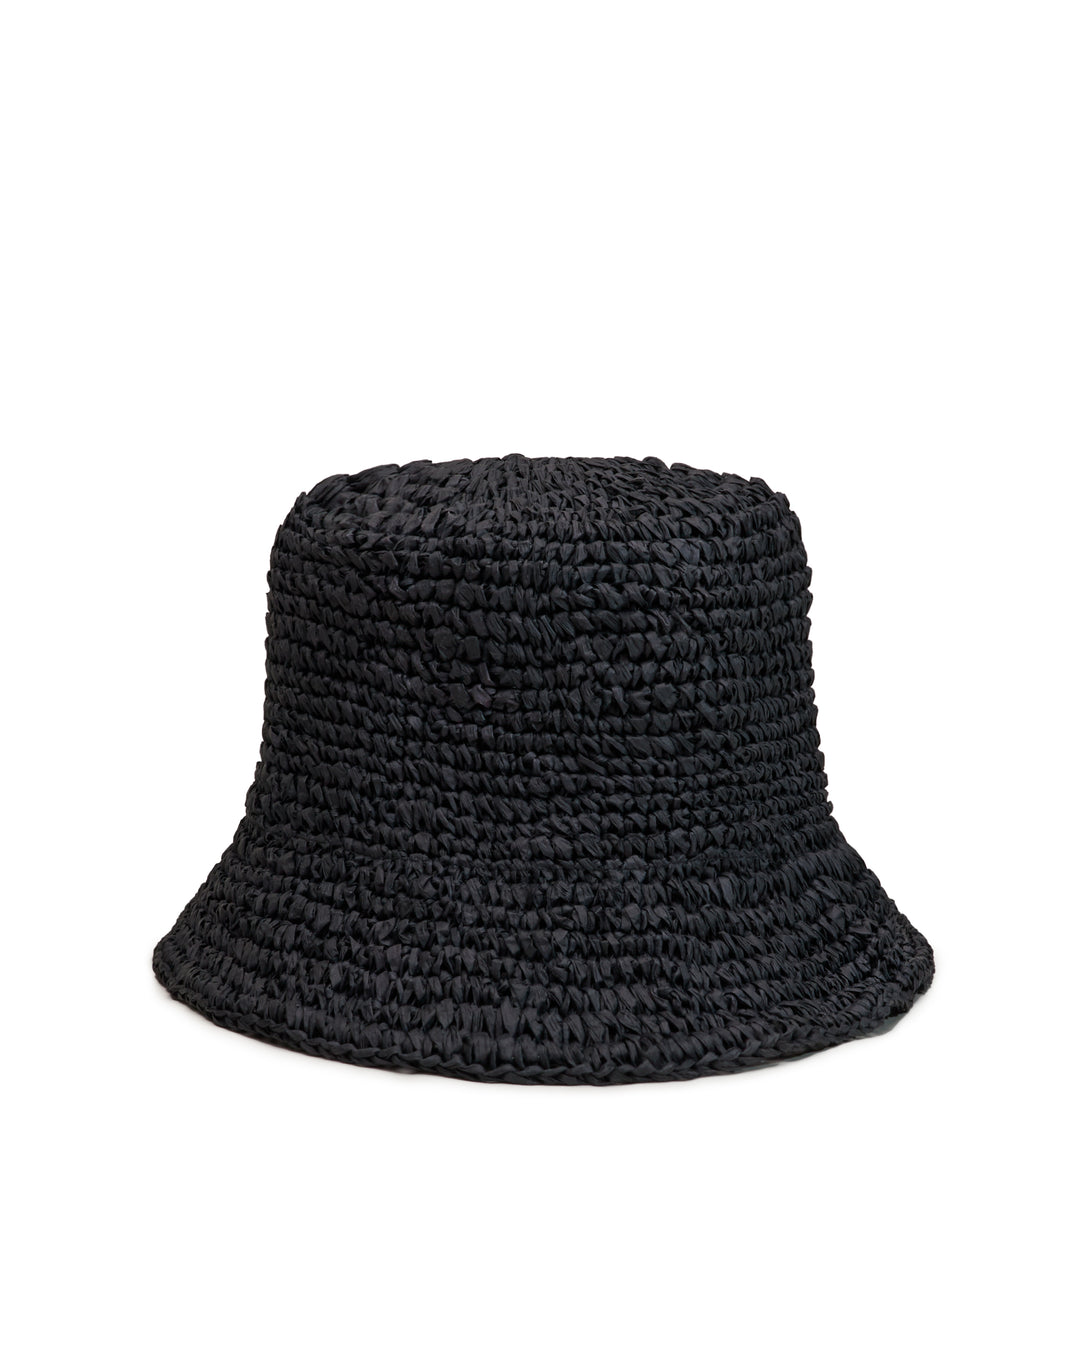 The Amabile Raffia Hat - Onyx by Dandy Del Mar isolated on a white background.